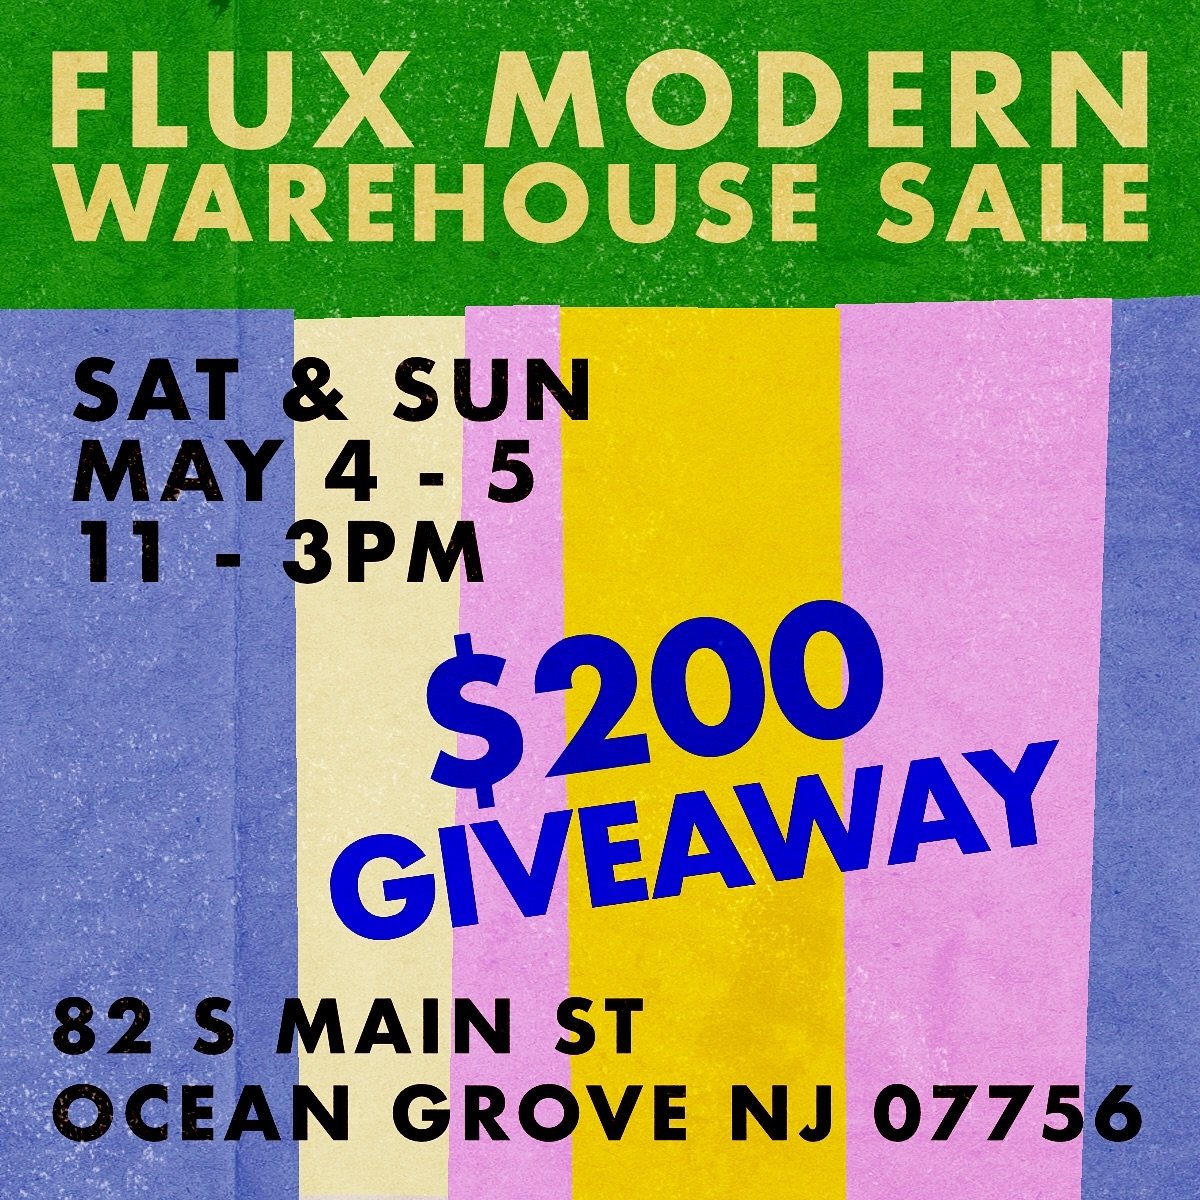 🗣️FLUX MODERN WAREHOUSE SALE THIS WEEKEND!🗣️

And to help spread the word, we&rsquo;re doing a $200 giveaway!

$200 GIVEAWAY:
-like this post
-Tag a friend in the comments for ONE ENTRY
-Enter as many times as you&rsquo;d like
-Share this post to y